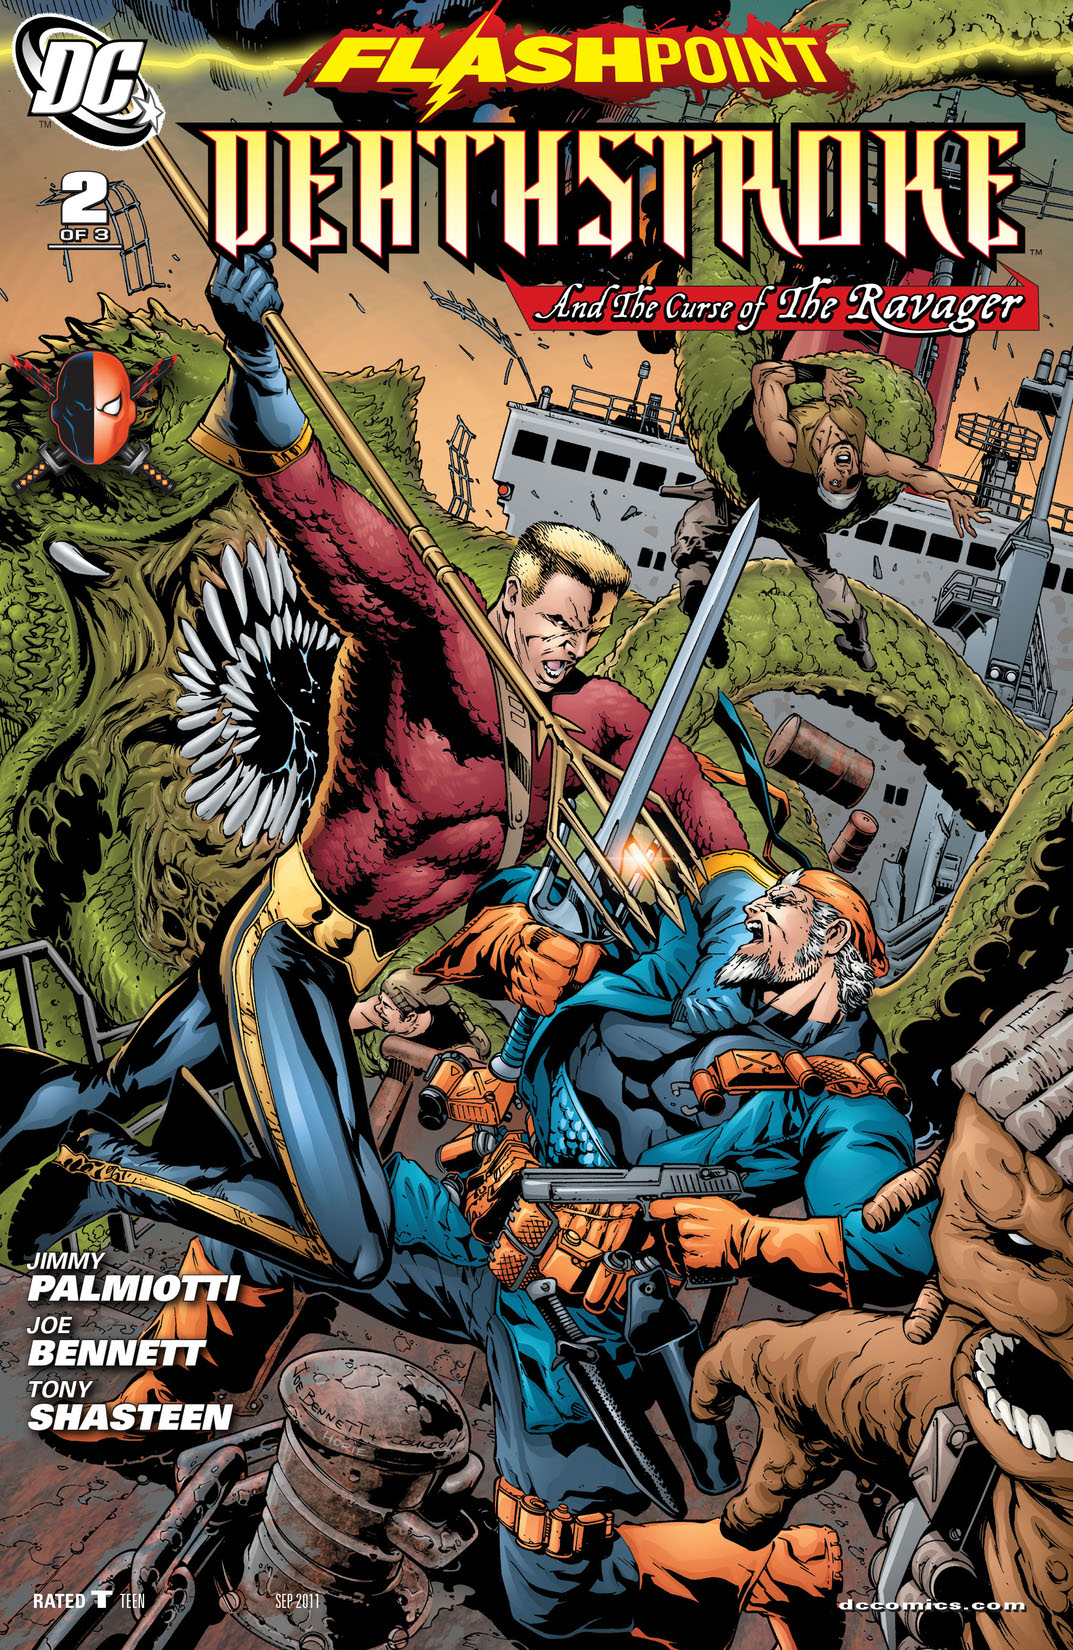 Flashpoint: Deathstroke & the Curse of the Ravager #2 preview images